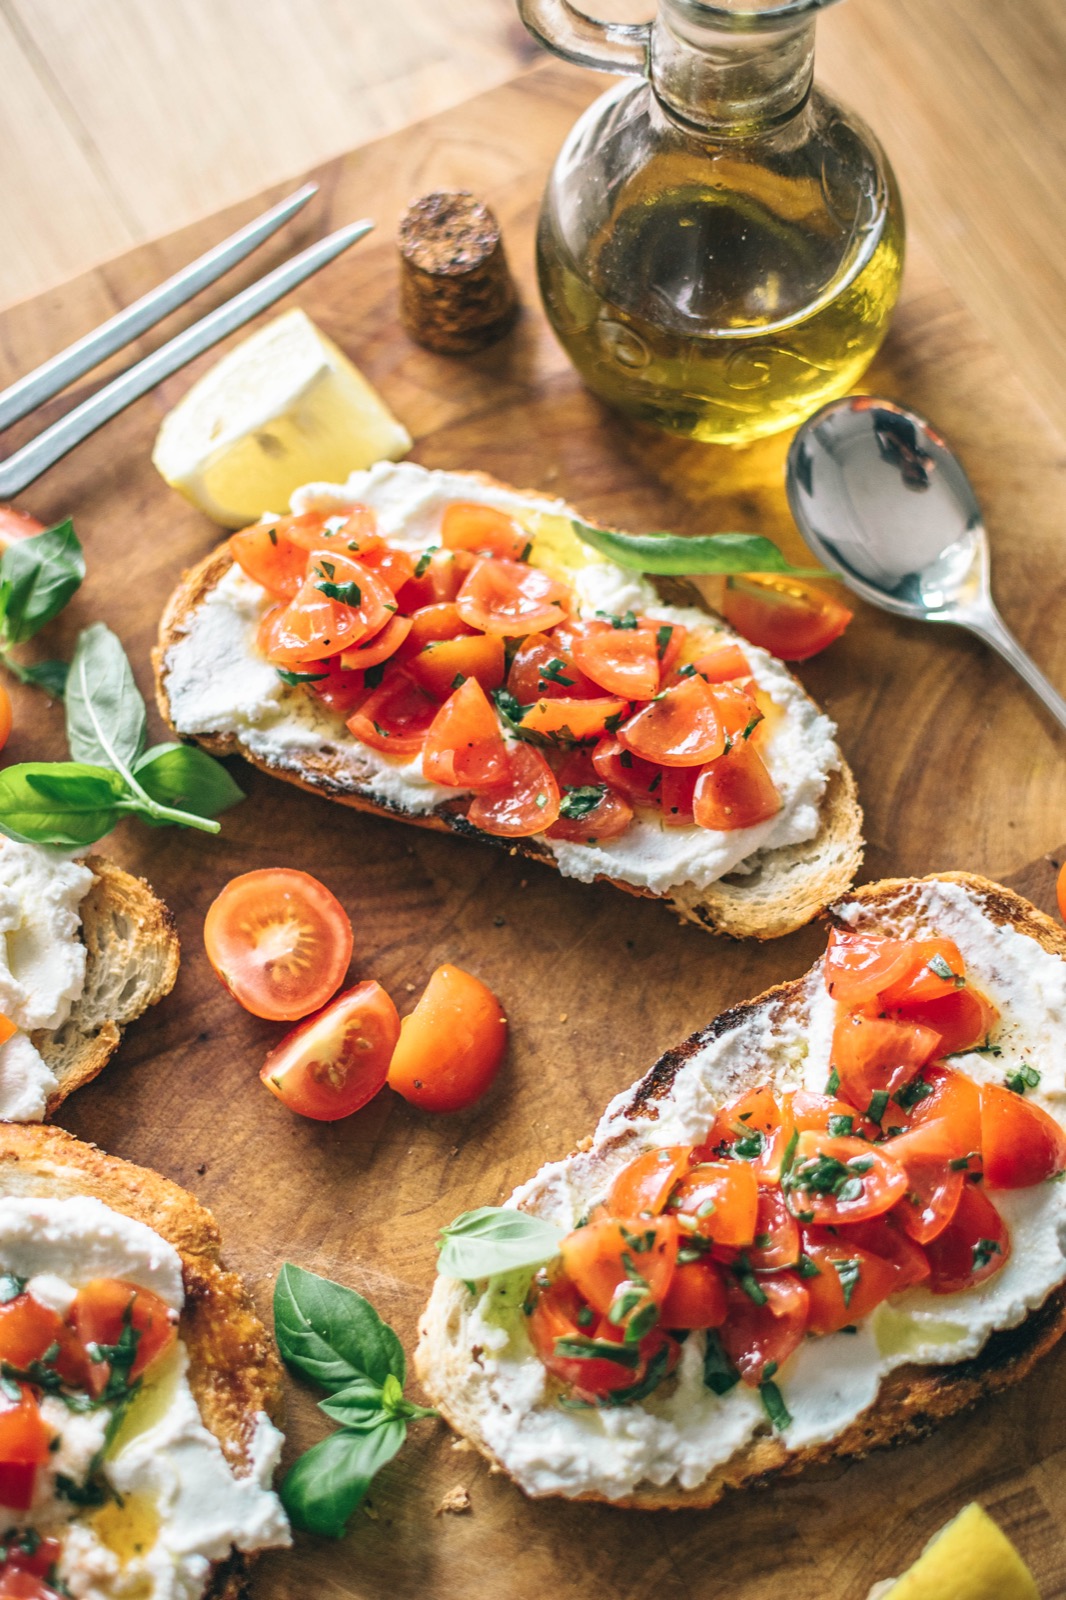 If You Want to Know the European City You Should Be Visiting, 🍝 Eat a Huuuge Meal of Diverse Foods to Find Out Bruschetta